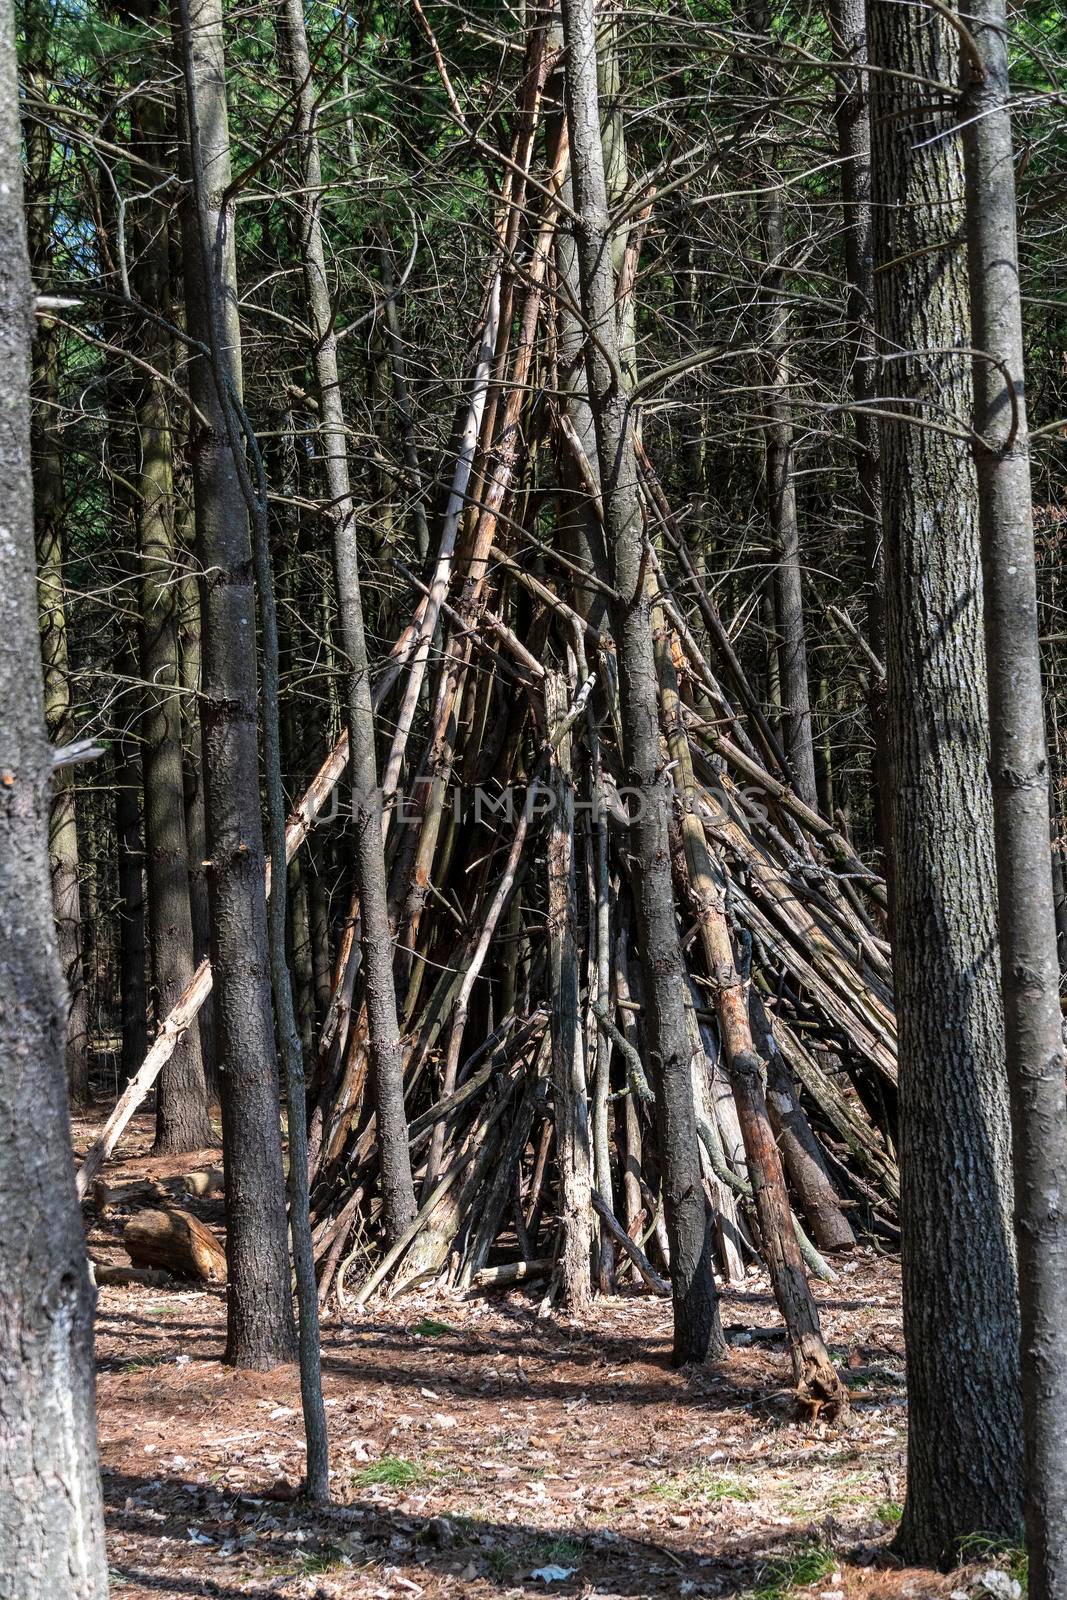 Dead wood collected in the forest is built in a pyramid and dries around a large tree